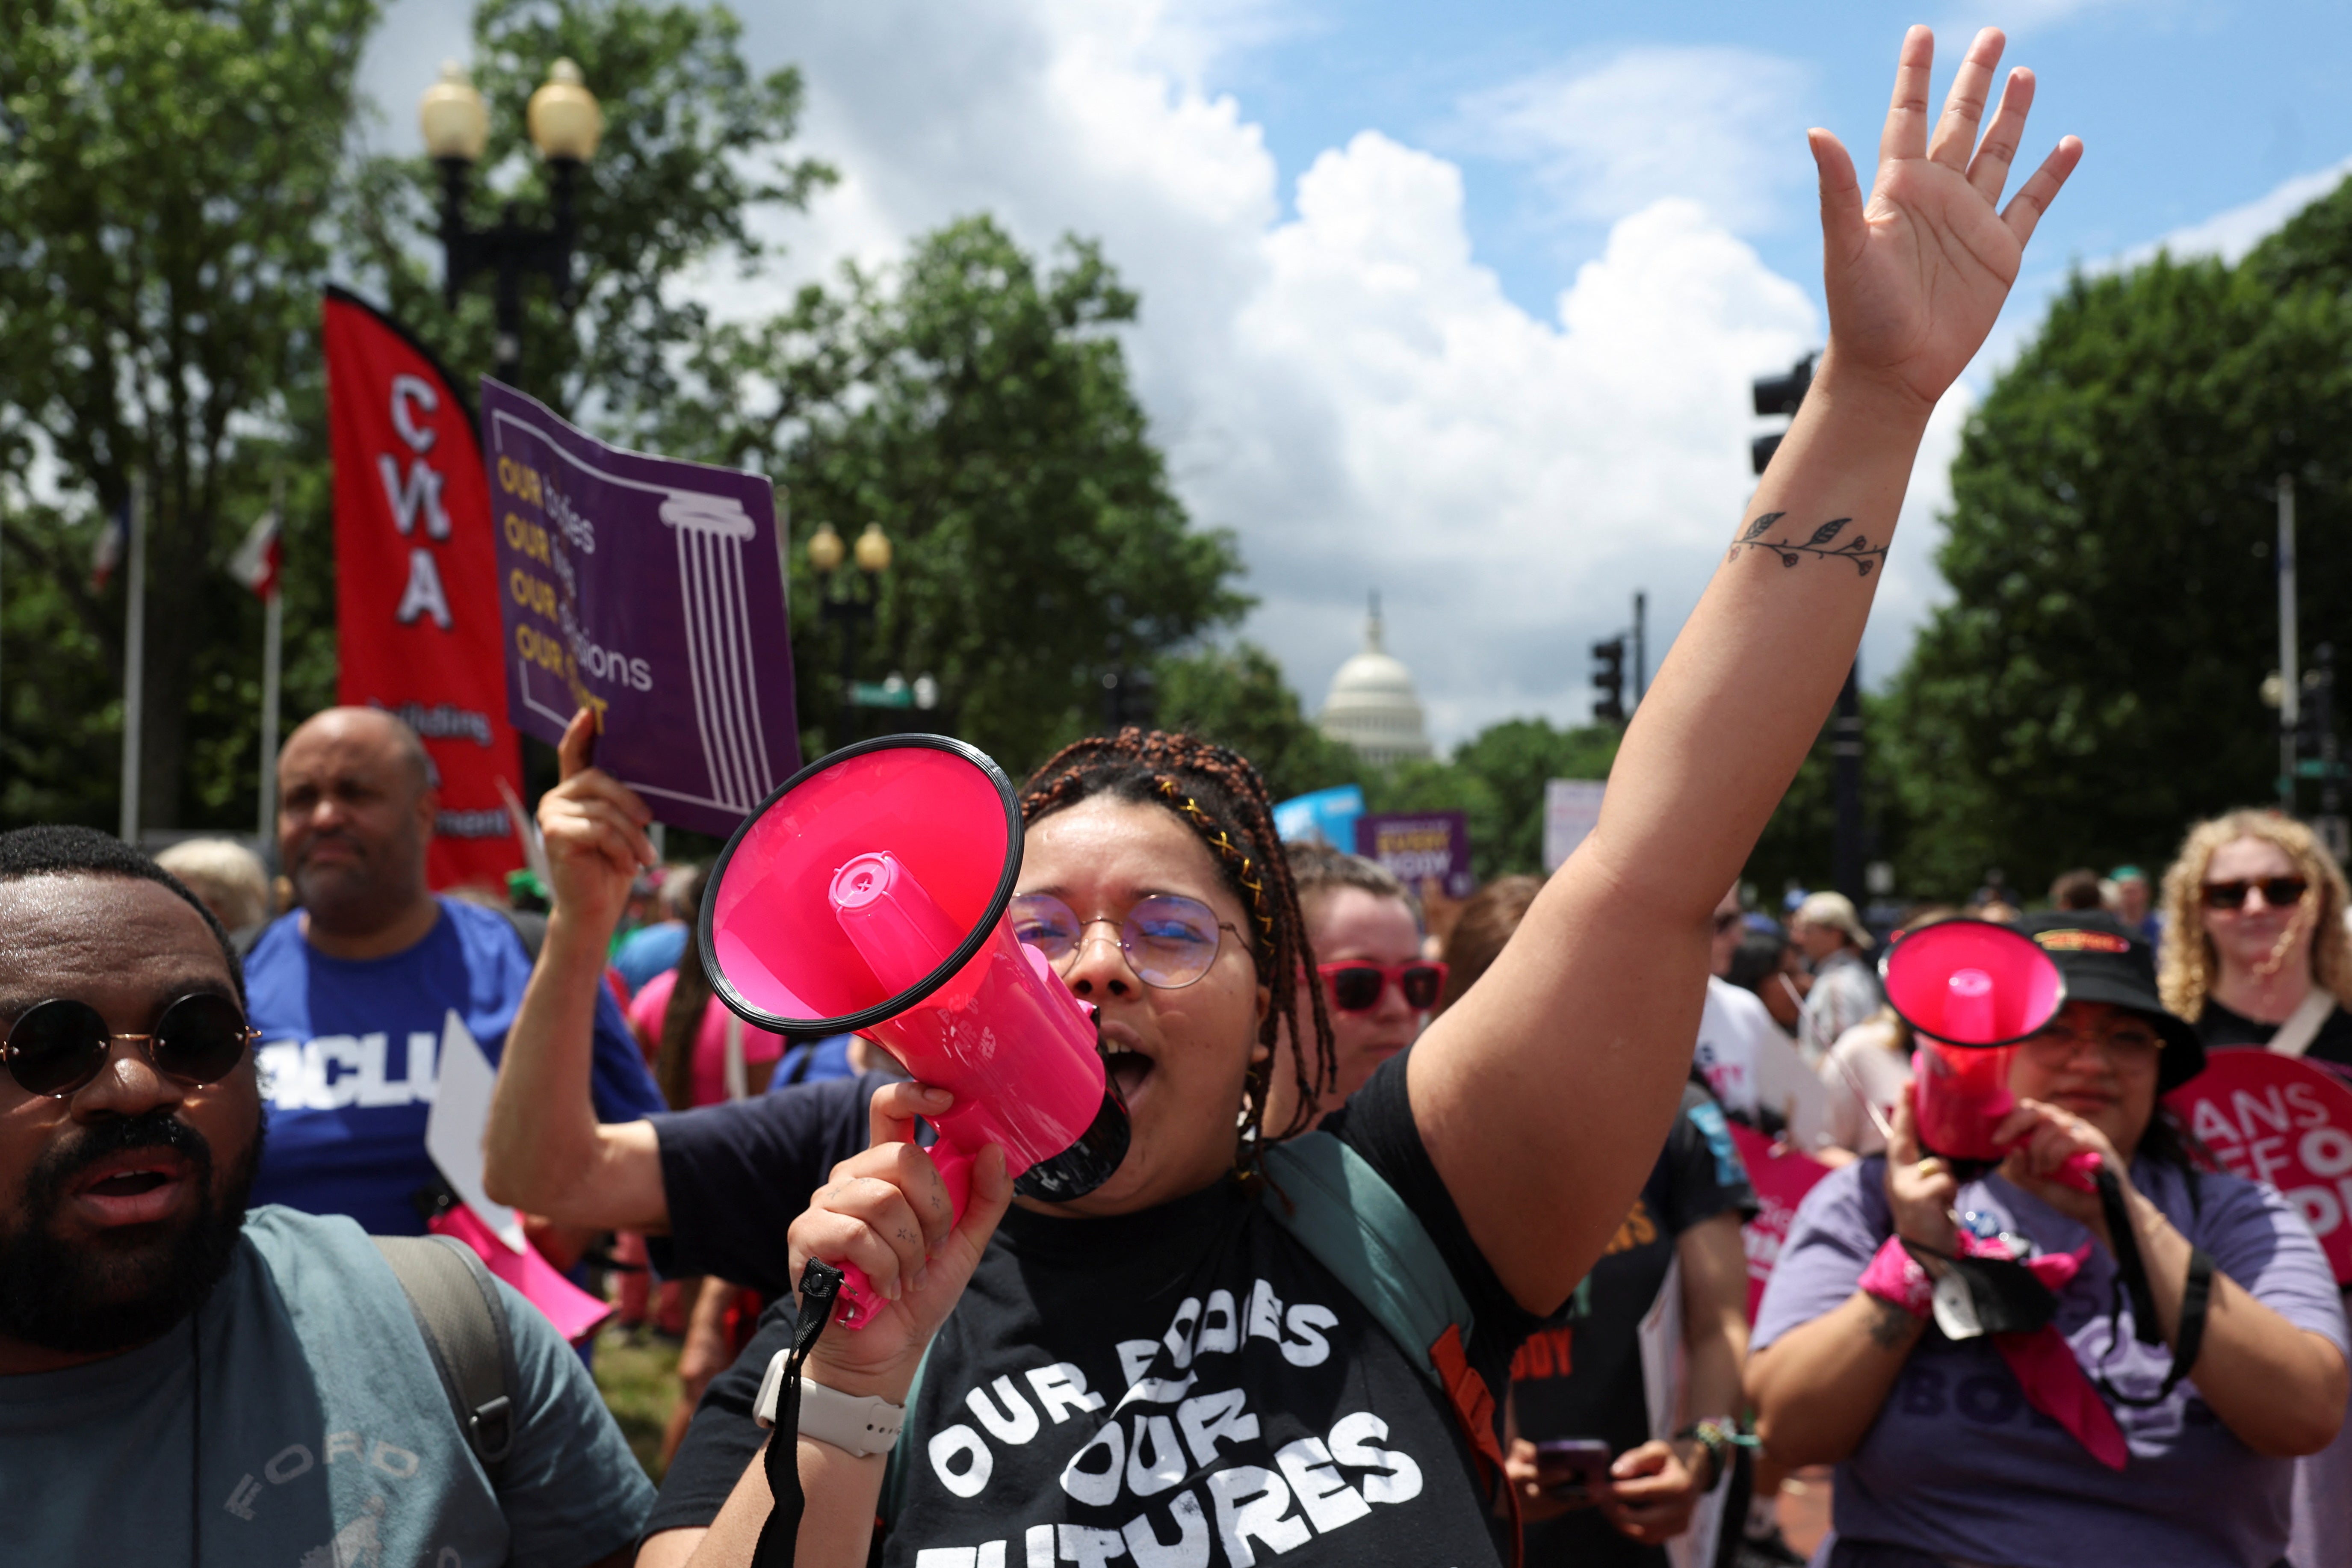 Abortion rights supporters marched to the Supreme Court in Washington DC to mark the one-year anniversary of a decision to overturn Roe v Wade.